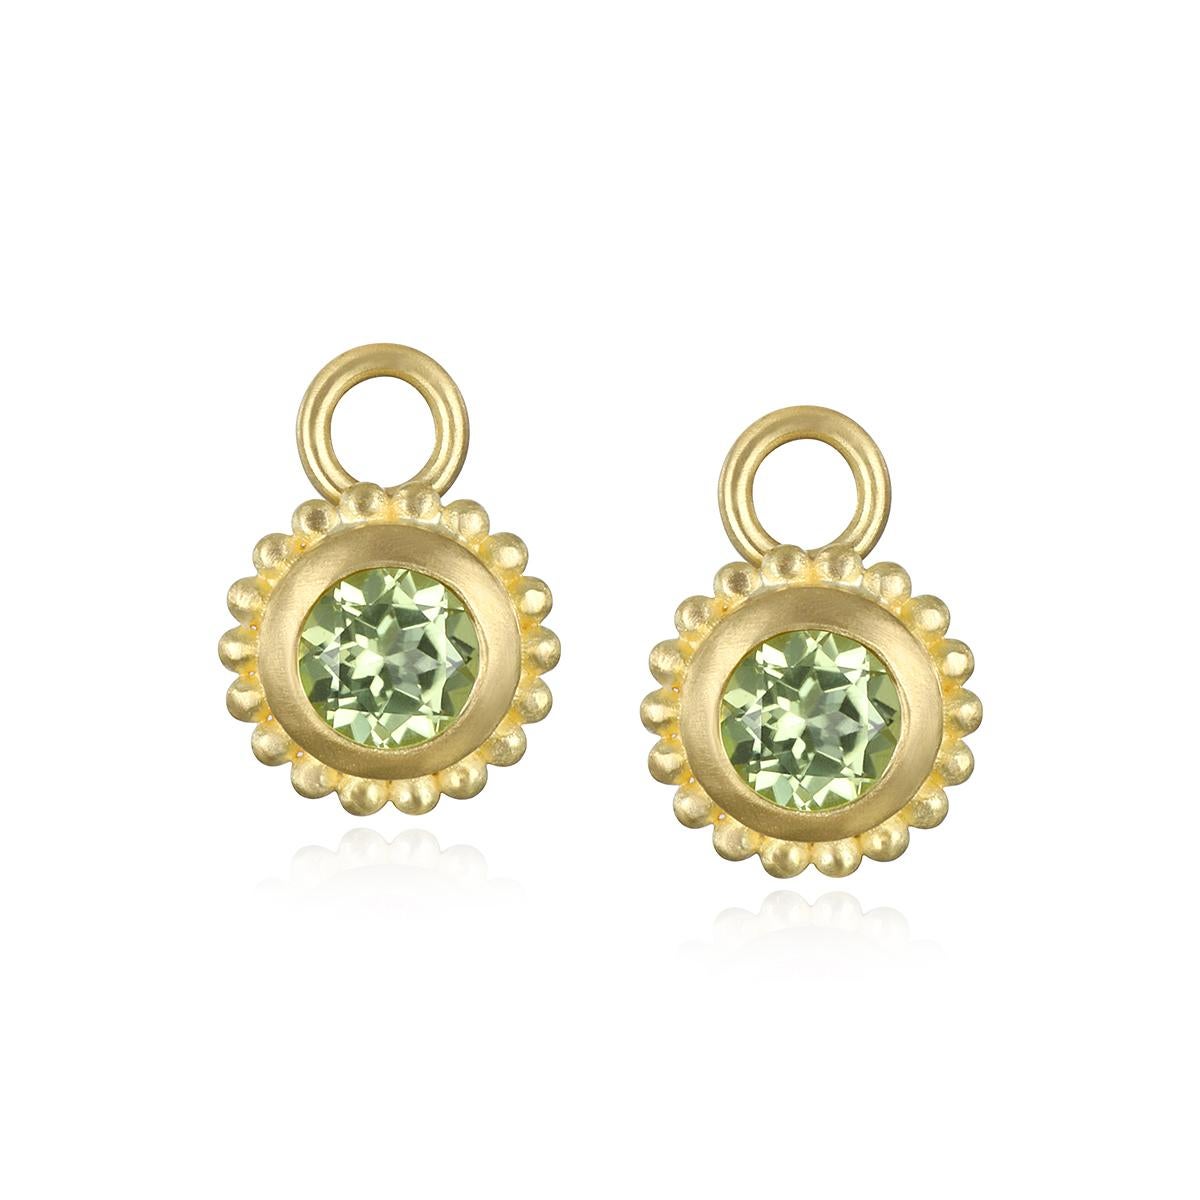 Faye Kim's 18 Karat Gold Hinged Huggy Hoops.
Matte finished, with removable Peridot Granulation Drops, 
these earrings would be a versatile and stylish addition to your jewelry collection.

Peridot Drops length from top of bail to bottom of bezel